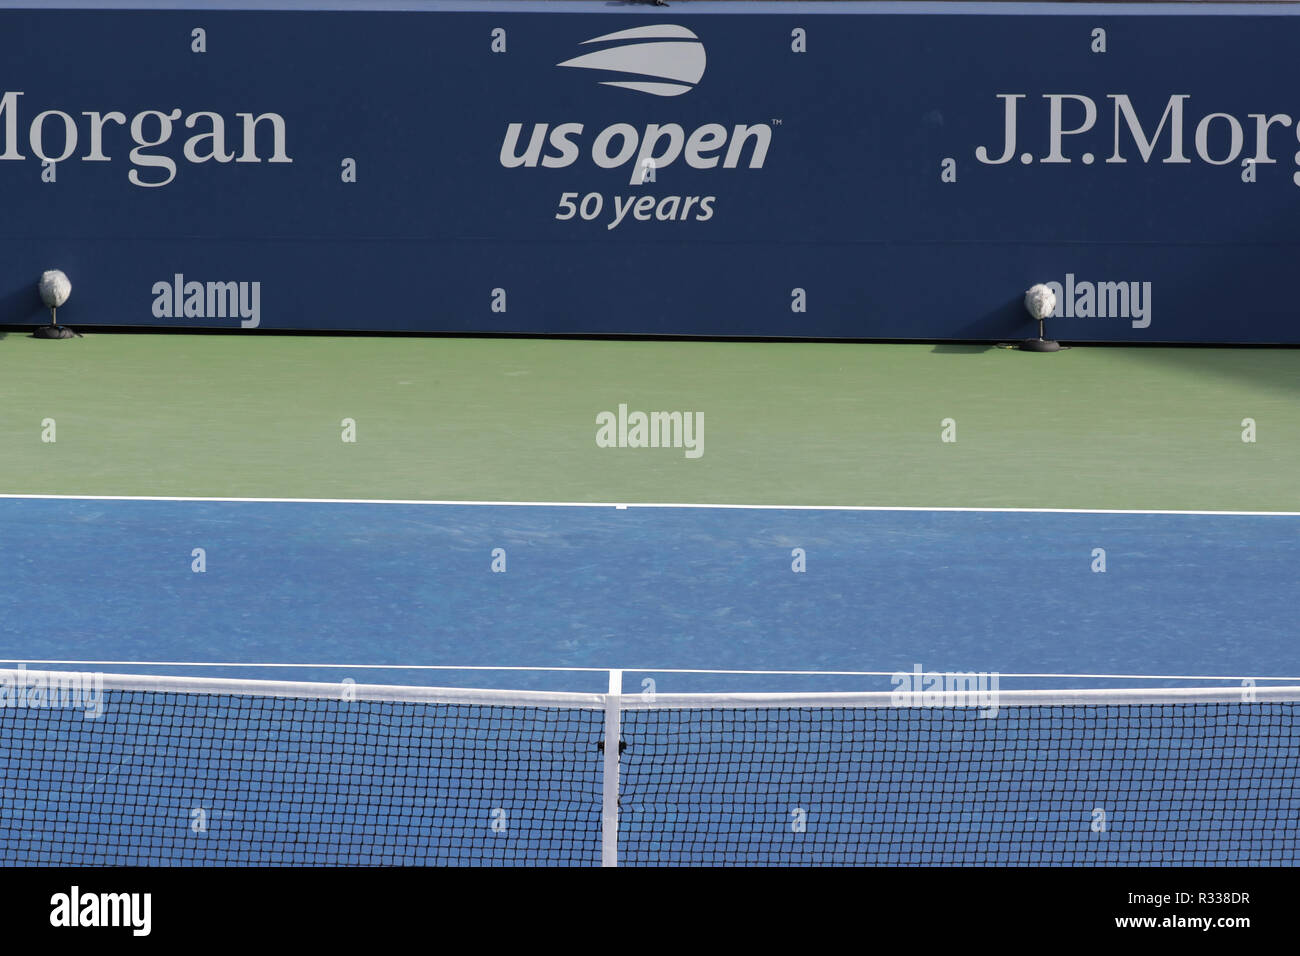 26 HQ Images Tennis New York Us Open / Our U S Open New York Guide To The Ultimate Tennis Match